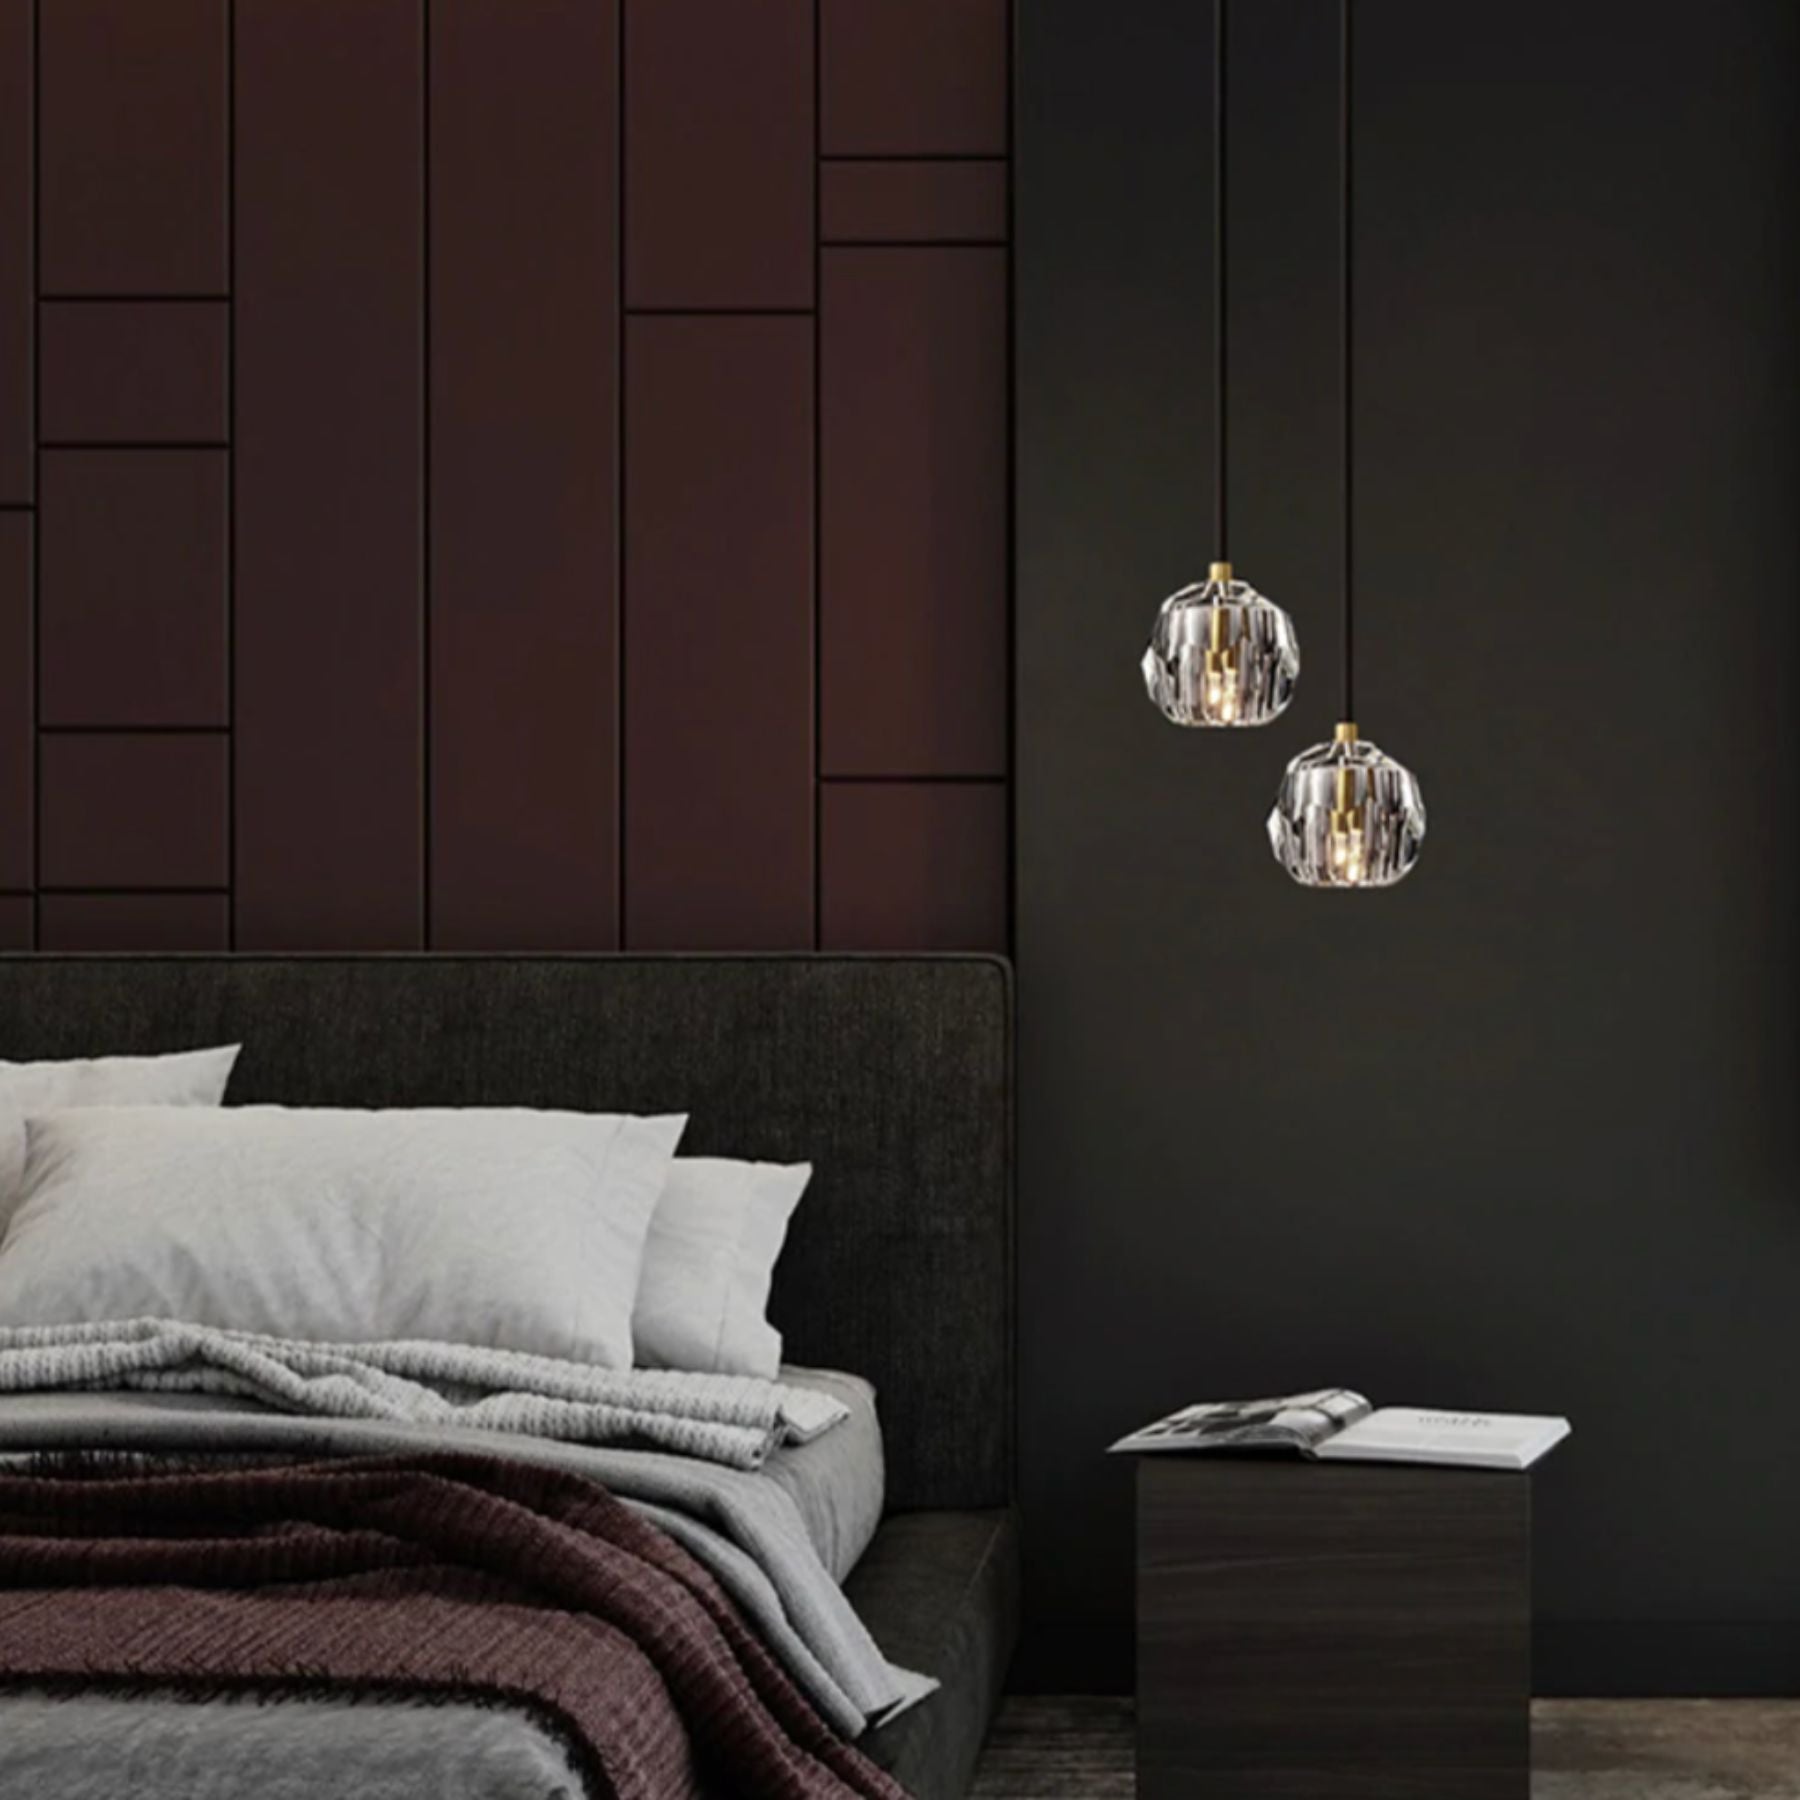 the simplicity of the creative crystal pendant lamp has a unique charm with its diamond cut patterns